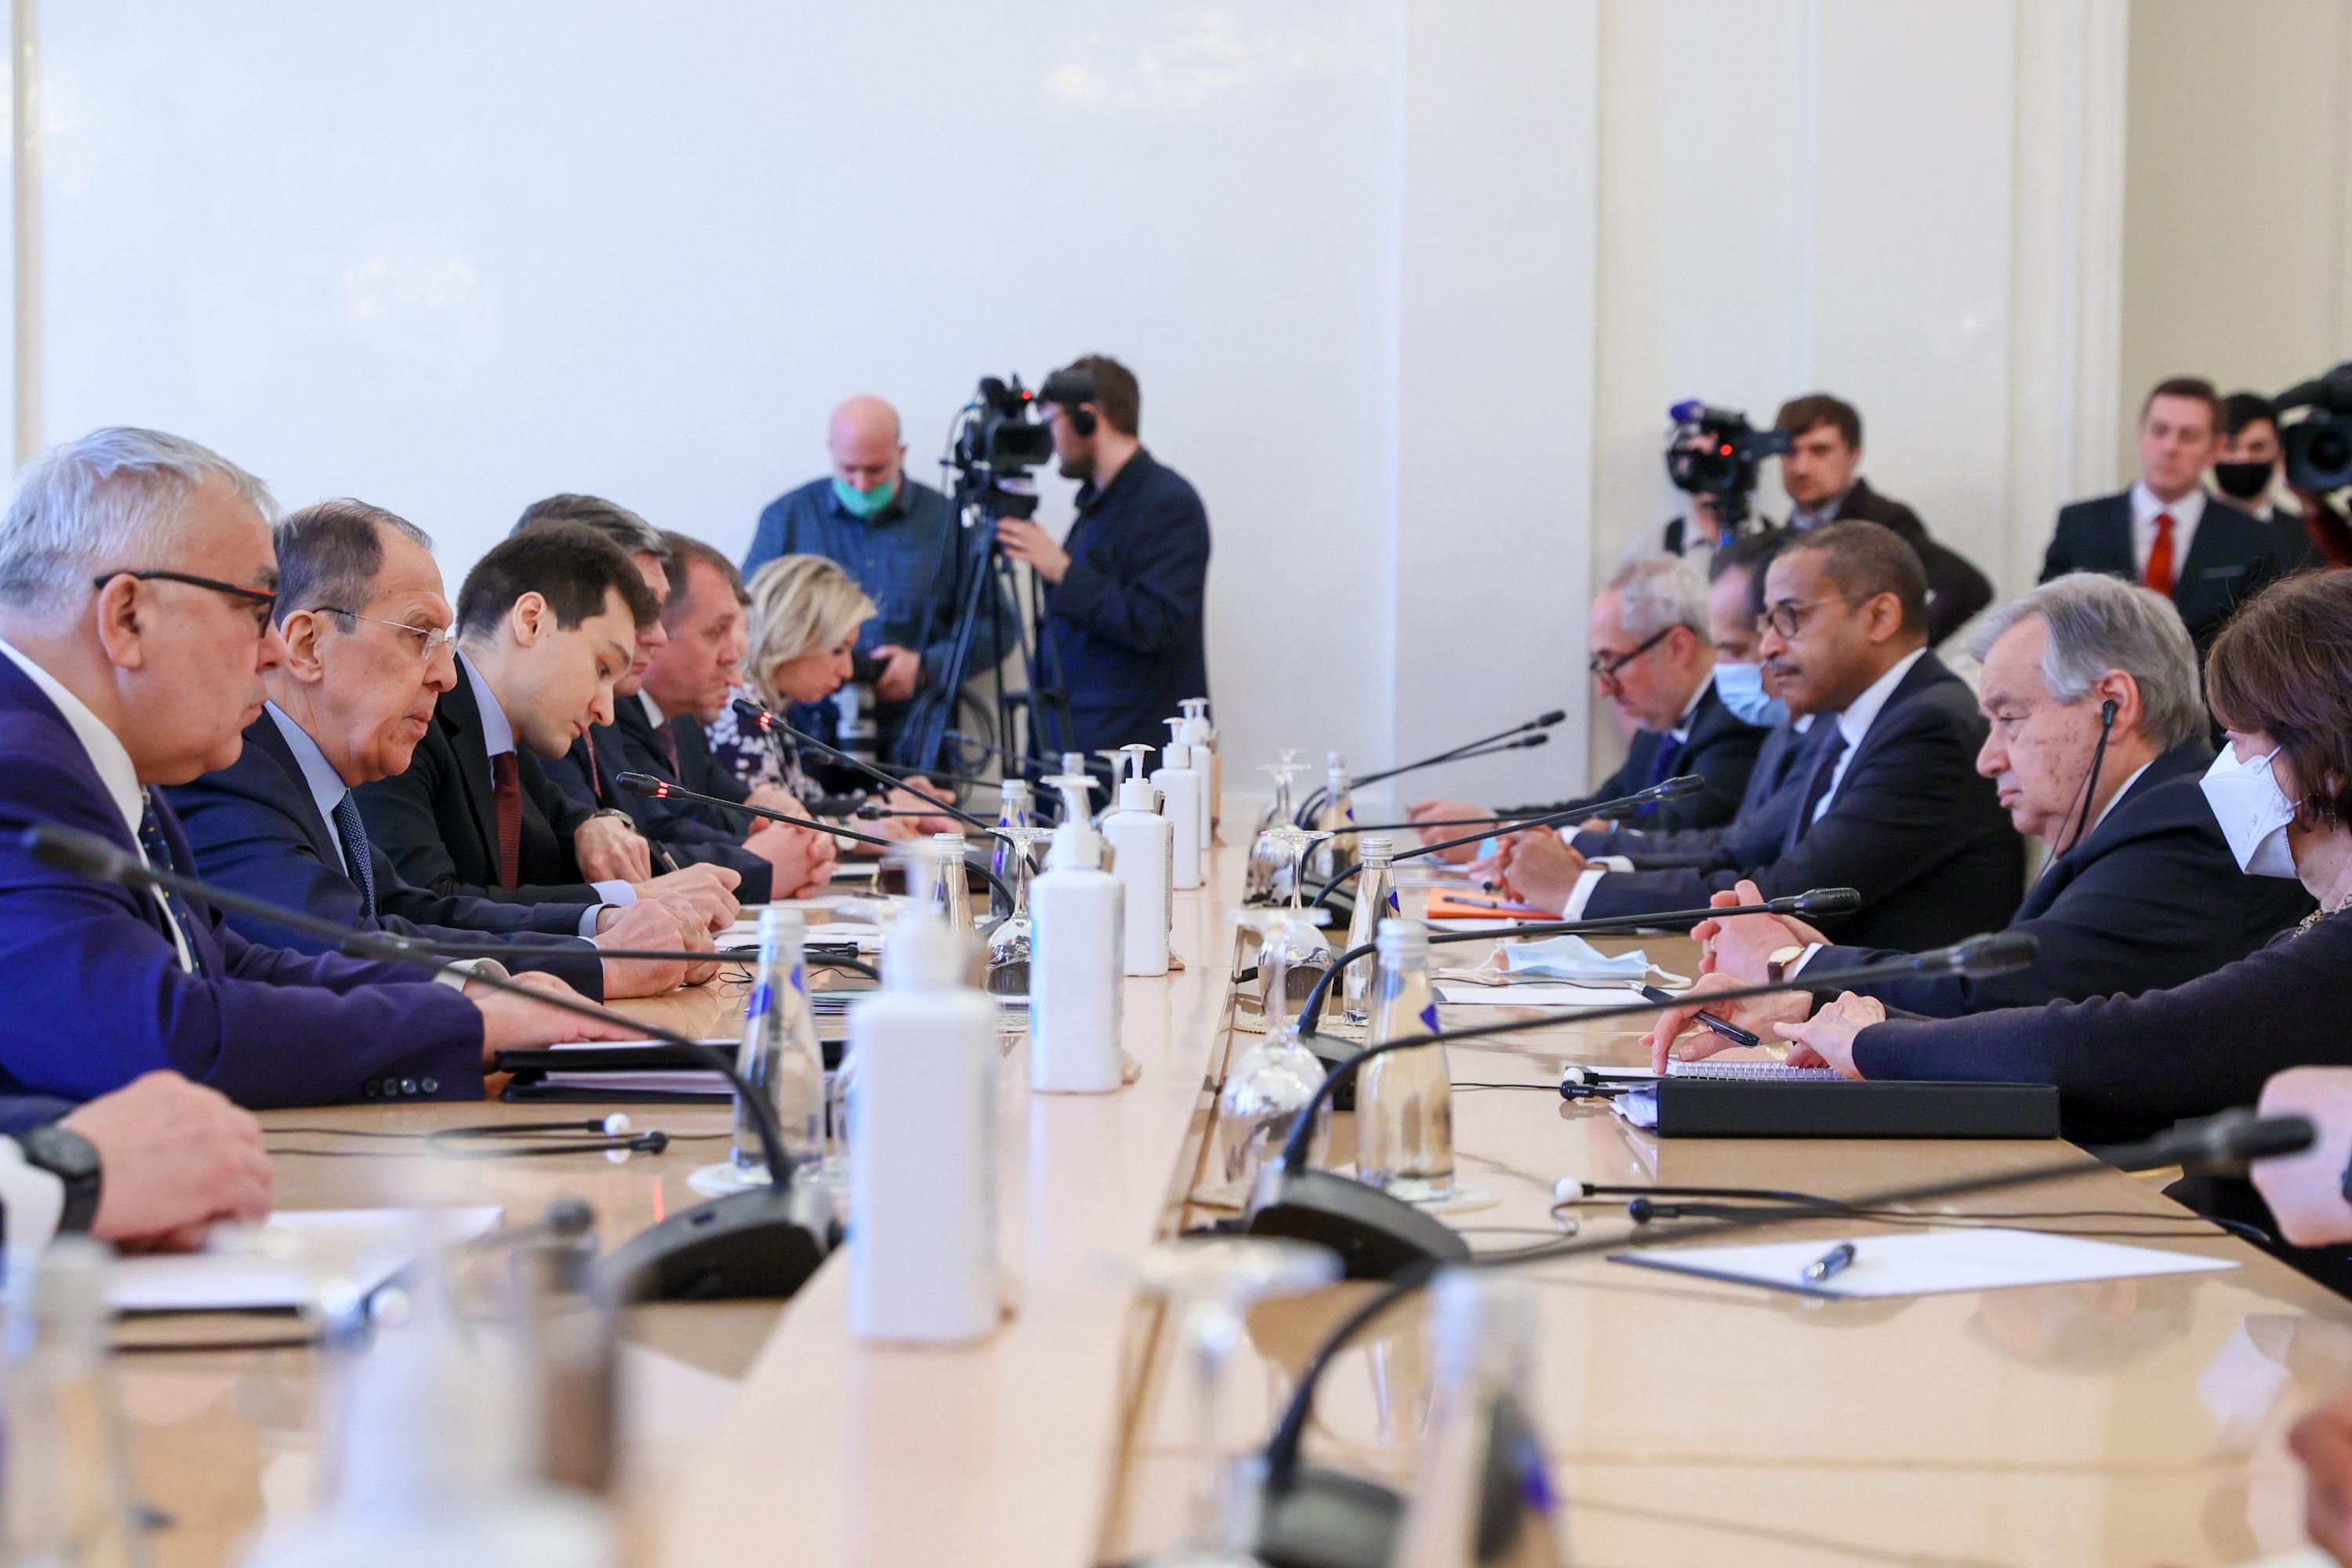 Russian Foreign Minister Sergei Lavrov (2nd L) meets United Nations Secretary-General António Guterres (2nd R) in Moscow on April 26, 2021. (Photo: Russian Foreign Ministry/Handout/Anadolu Agency via Getty Images)